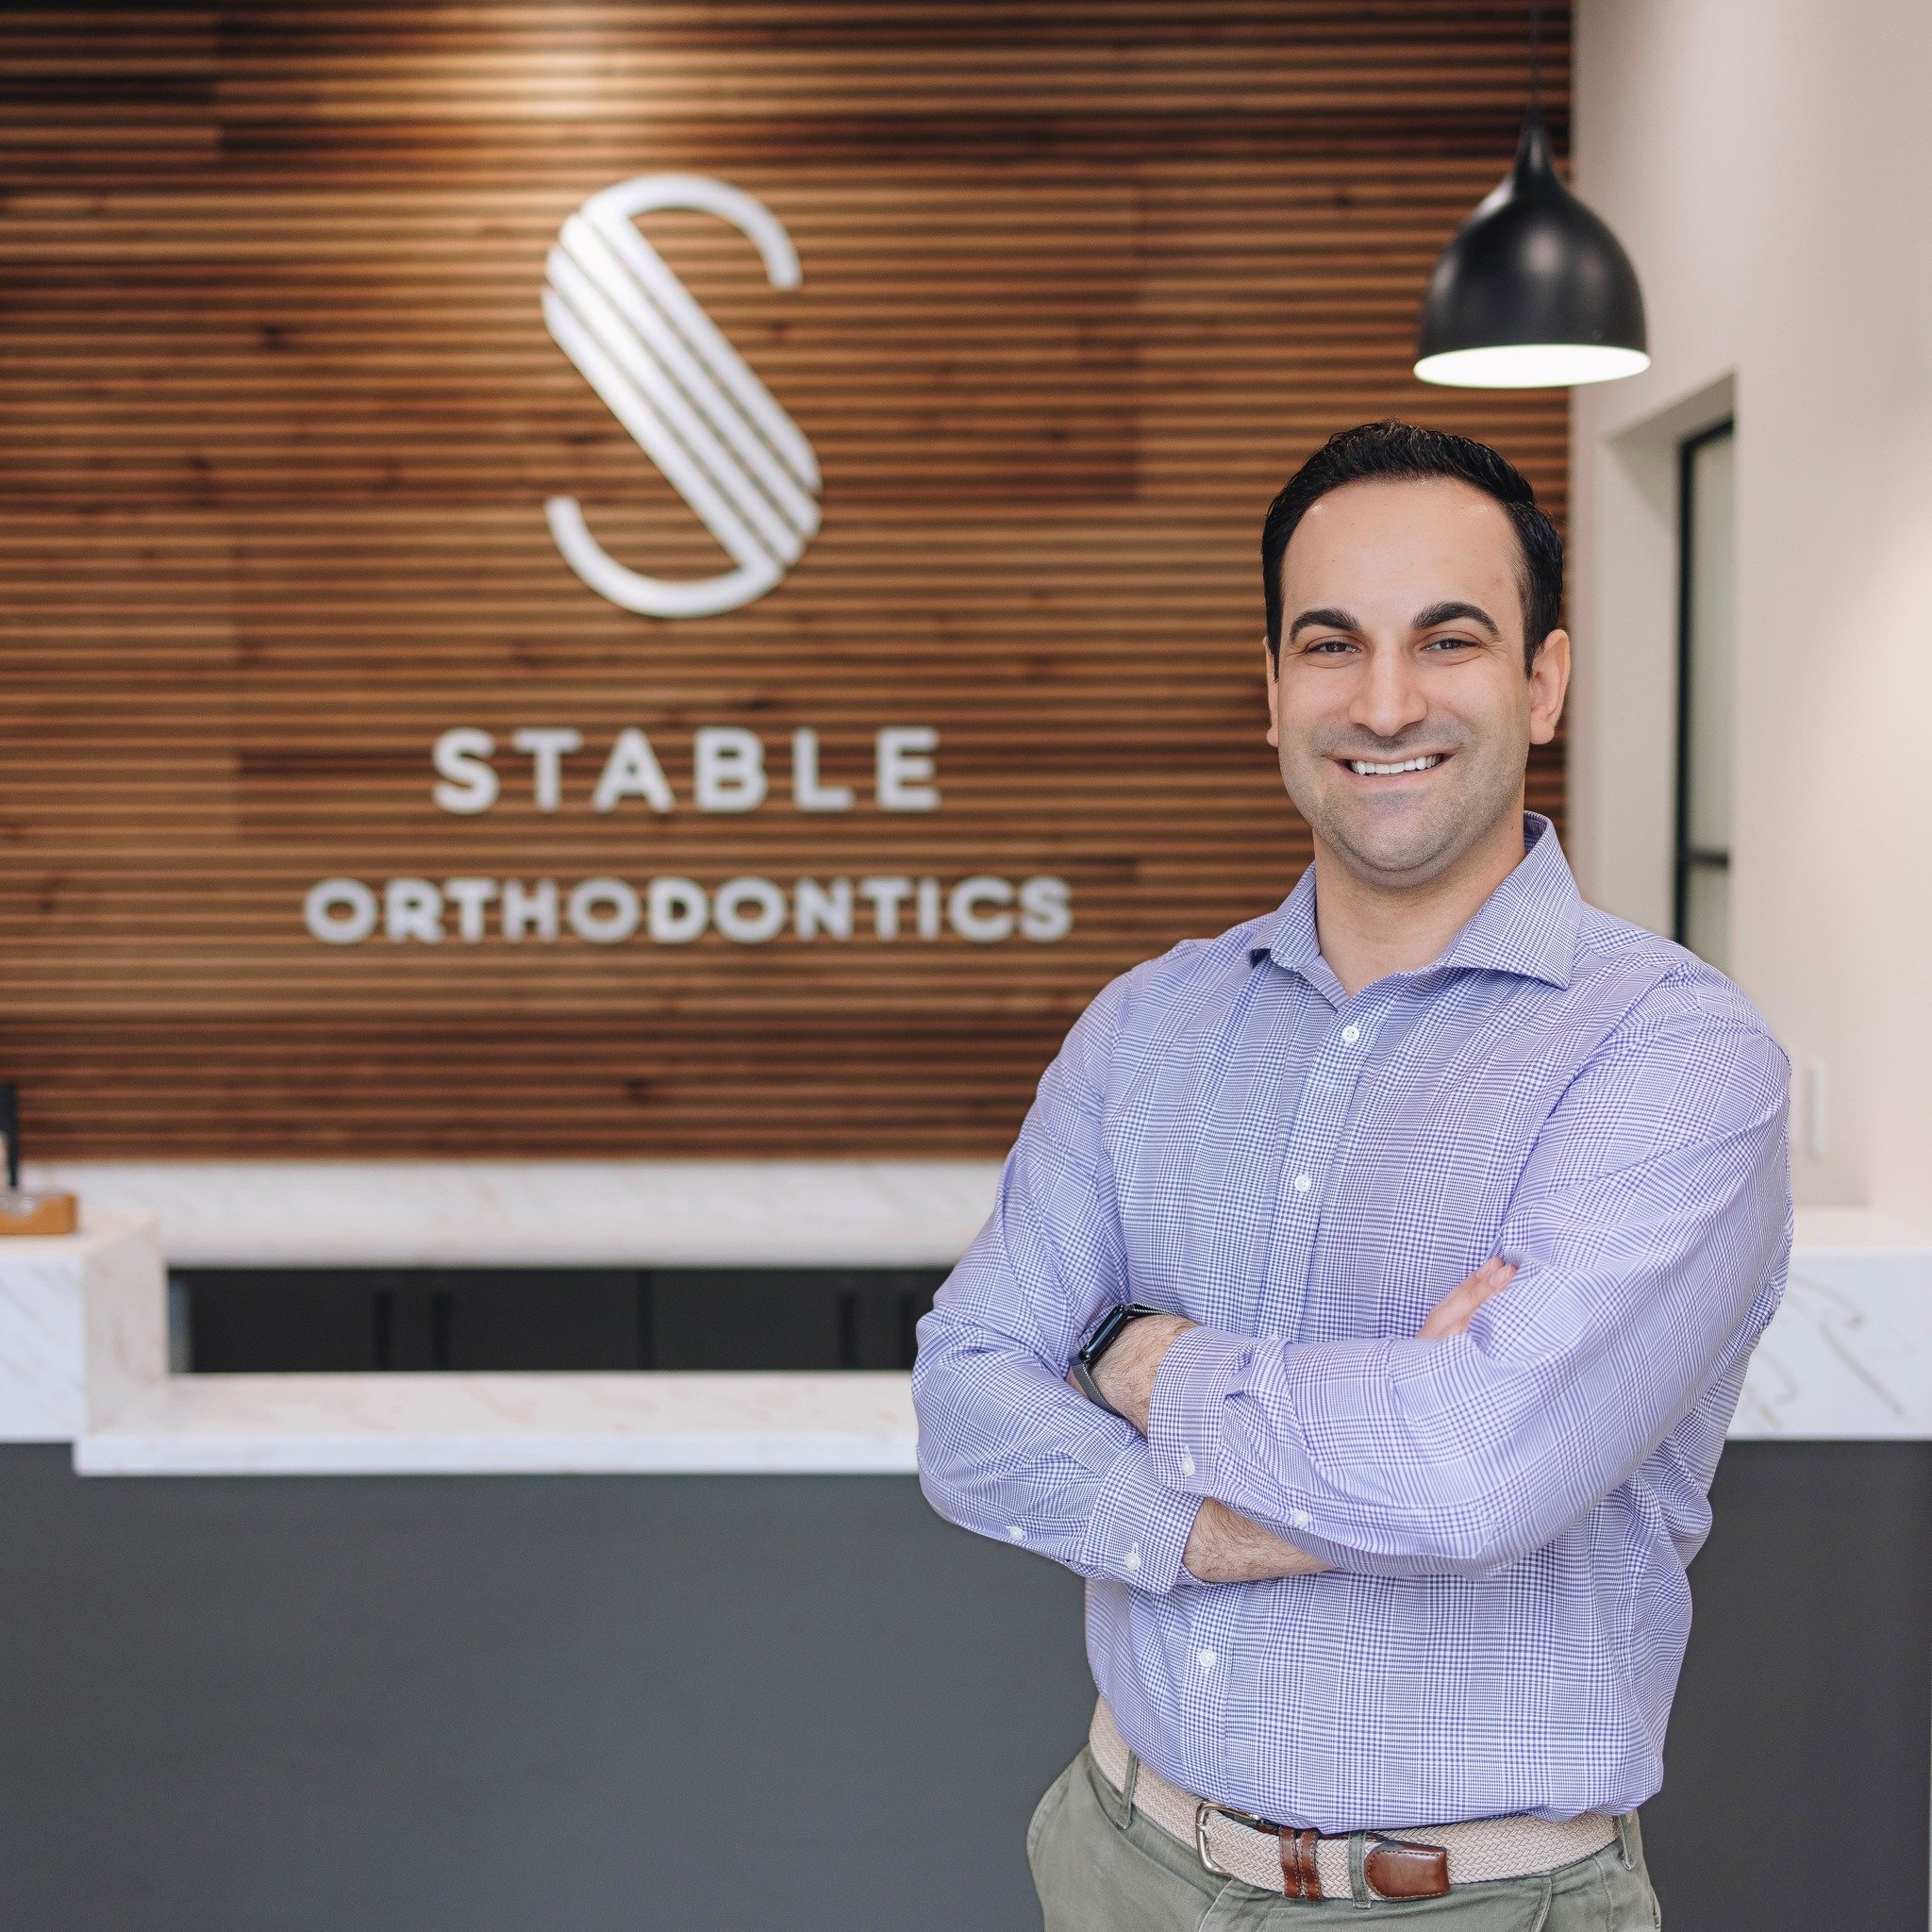 Meet Dr. Korry Tauber! We are happy to welcome @stable.orthodontics as a new Community Partner for 2024. Dr. Korry Tauber is a Board-Certified Orthodontist who is opening Stable Orthodontics in the Milton community. You are invited to their Grand Ope